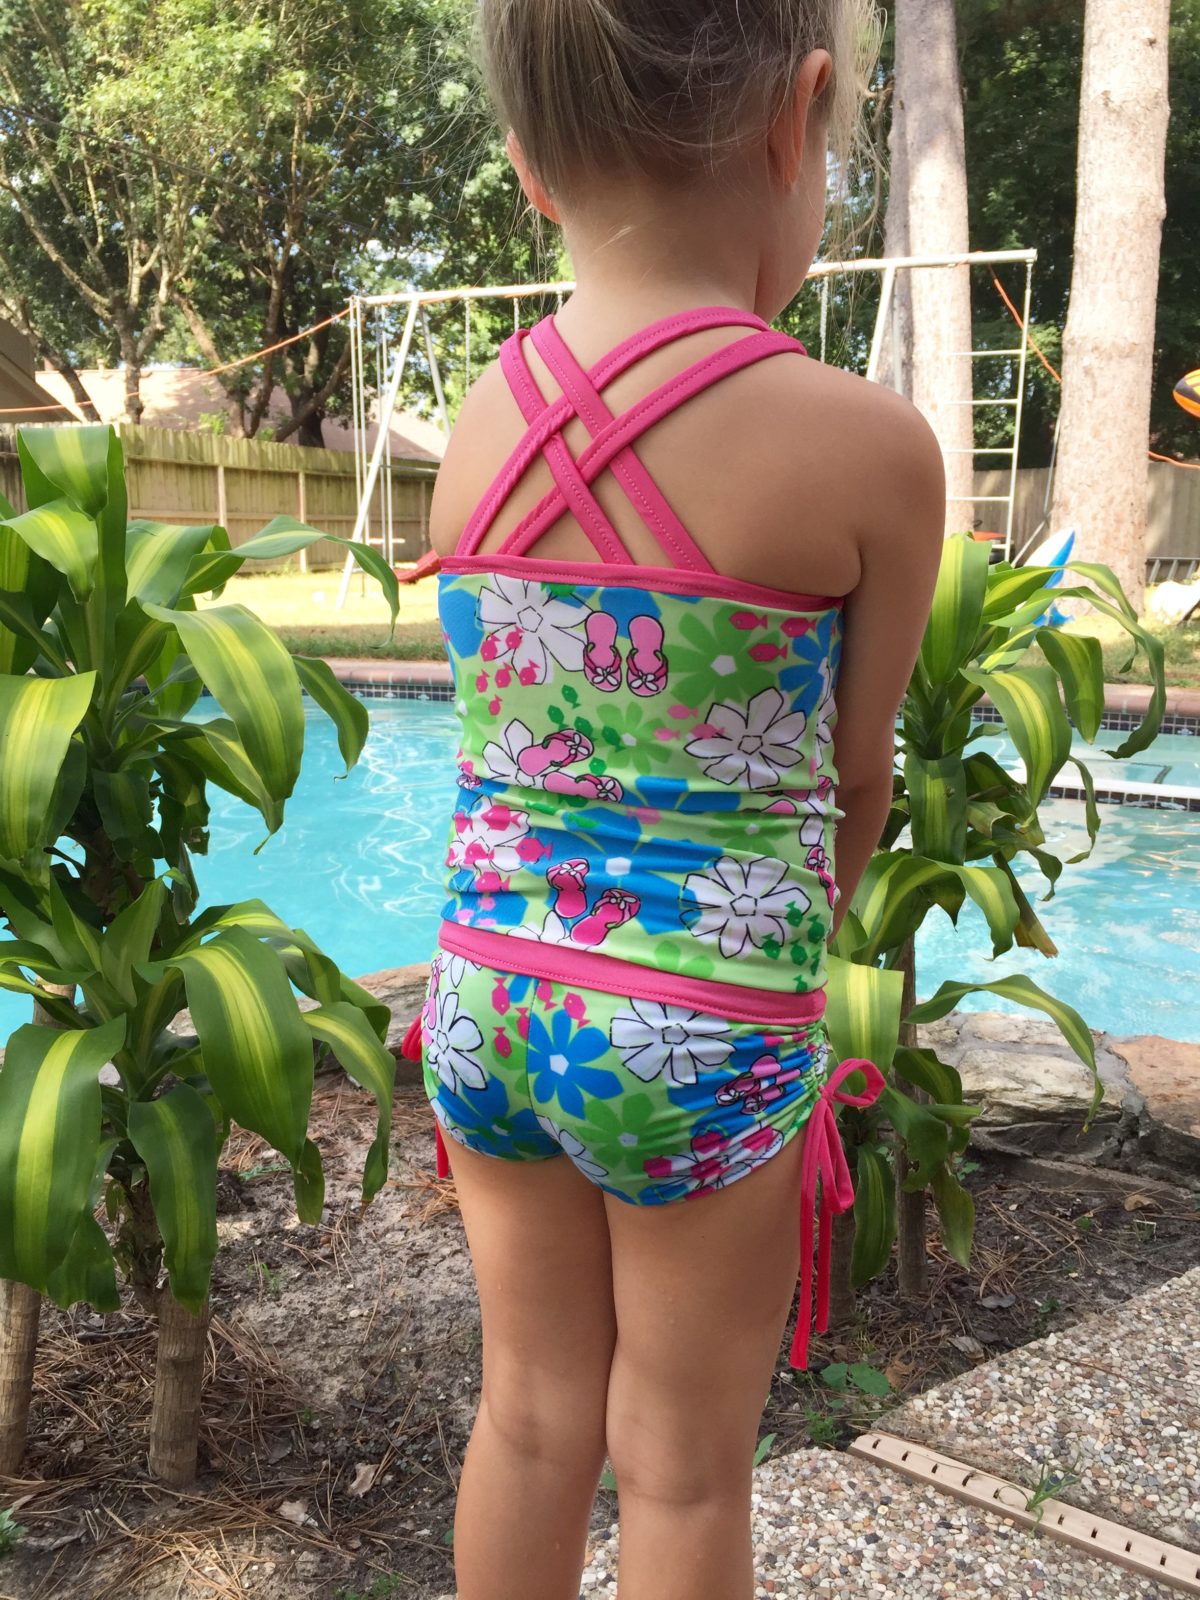 Kids' Agility Tank and Dress - 5 out of 4 Patterns